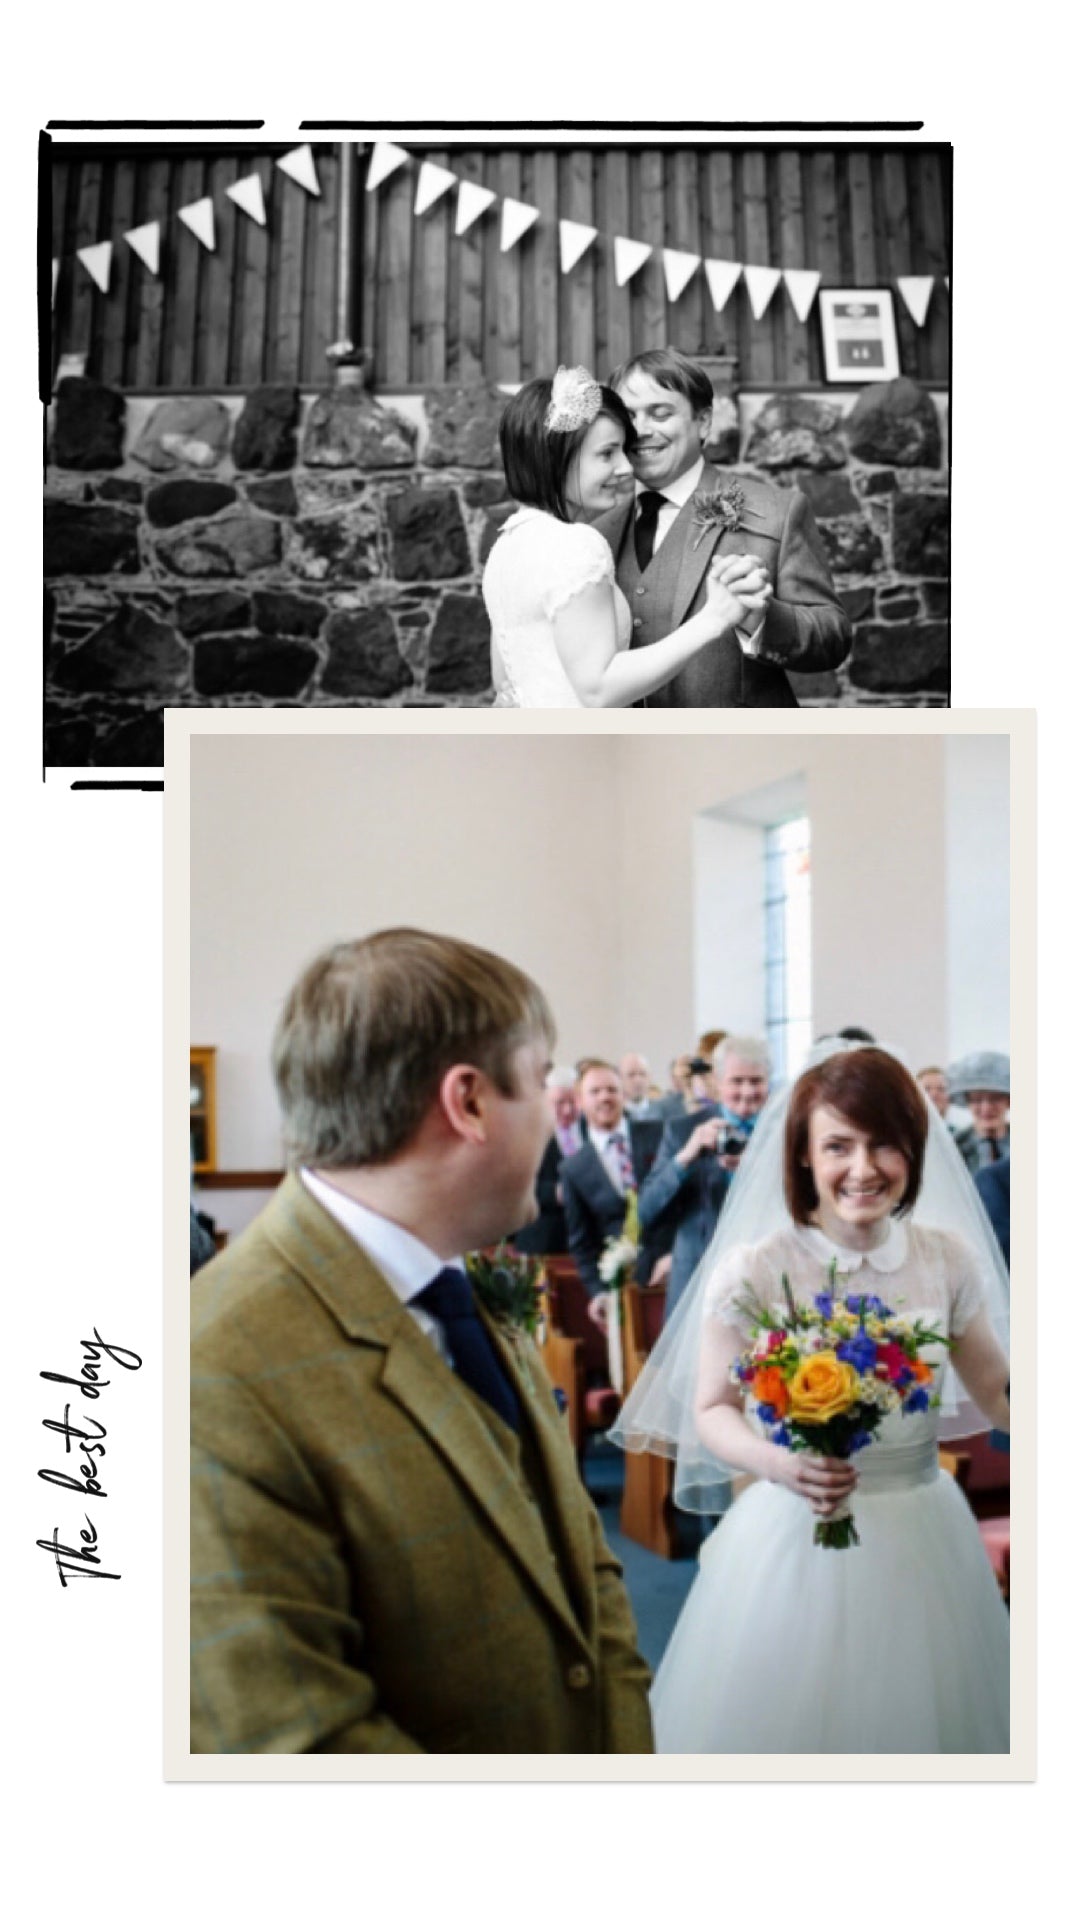 Karen and David at their wedding - Founders and Owners of the Belfast Bow Company